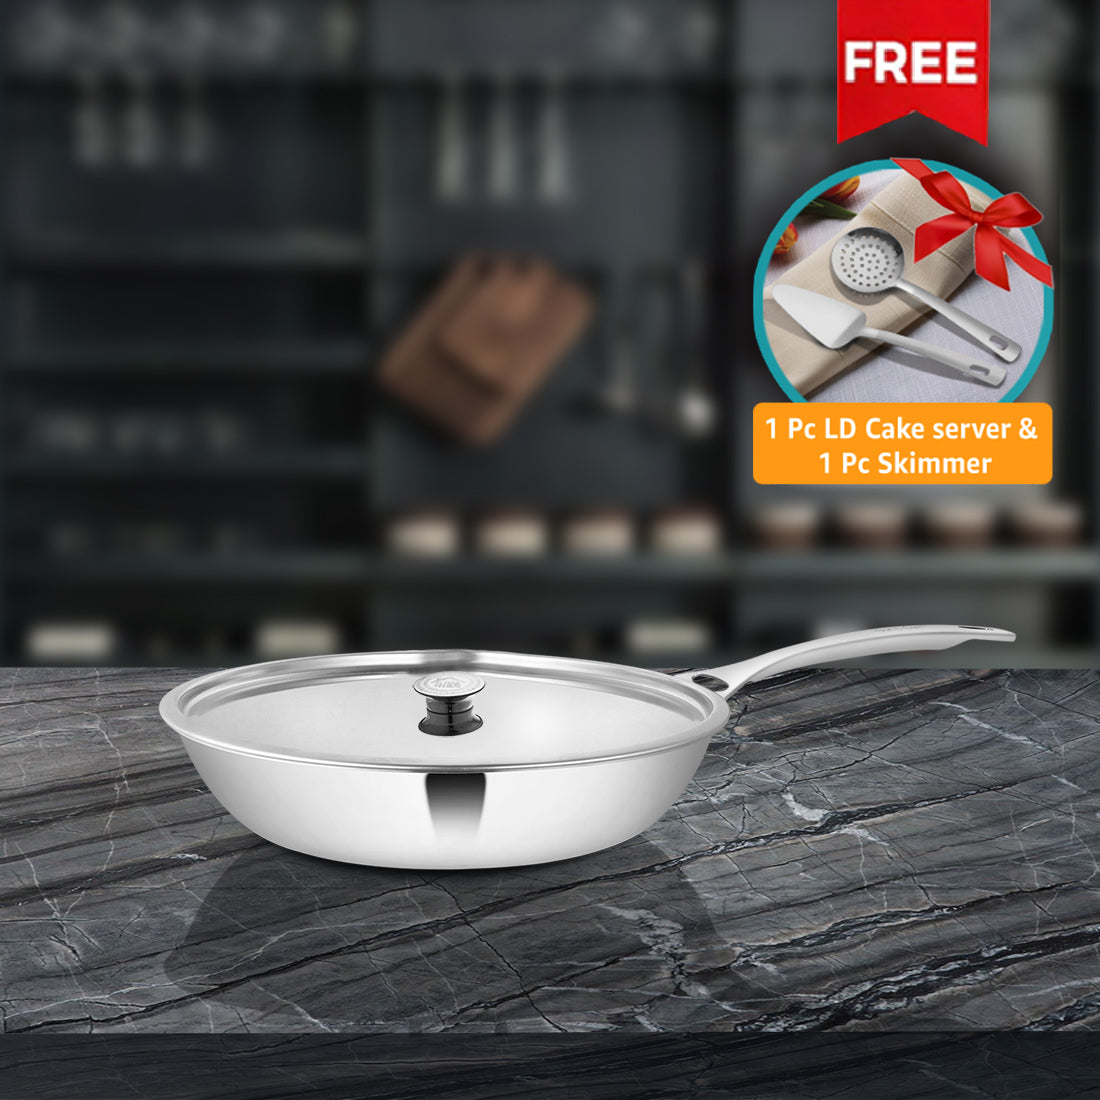 Stainless Steel Heavy Weight Fry Pan with SS Lid Platinum